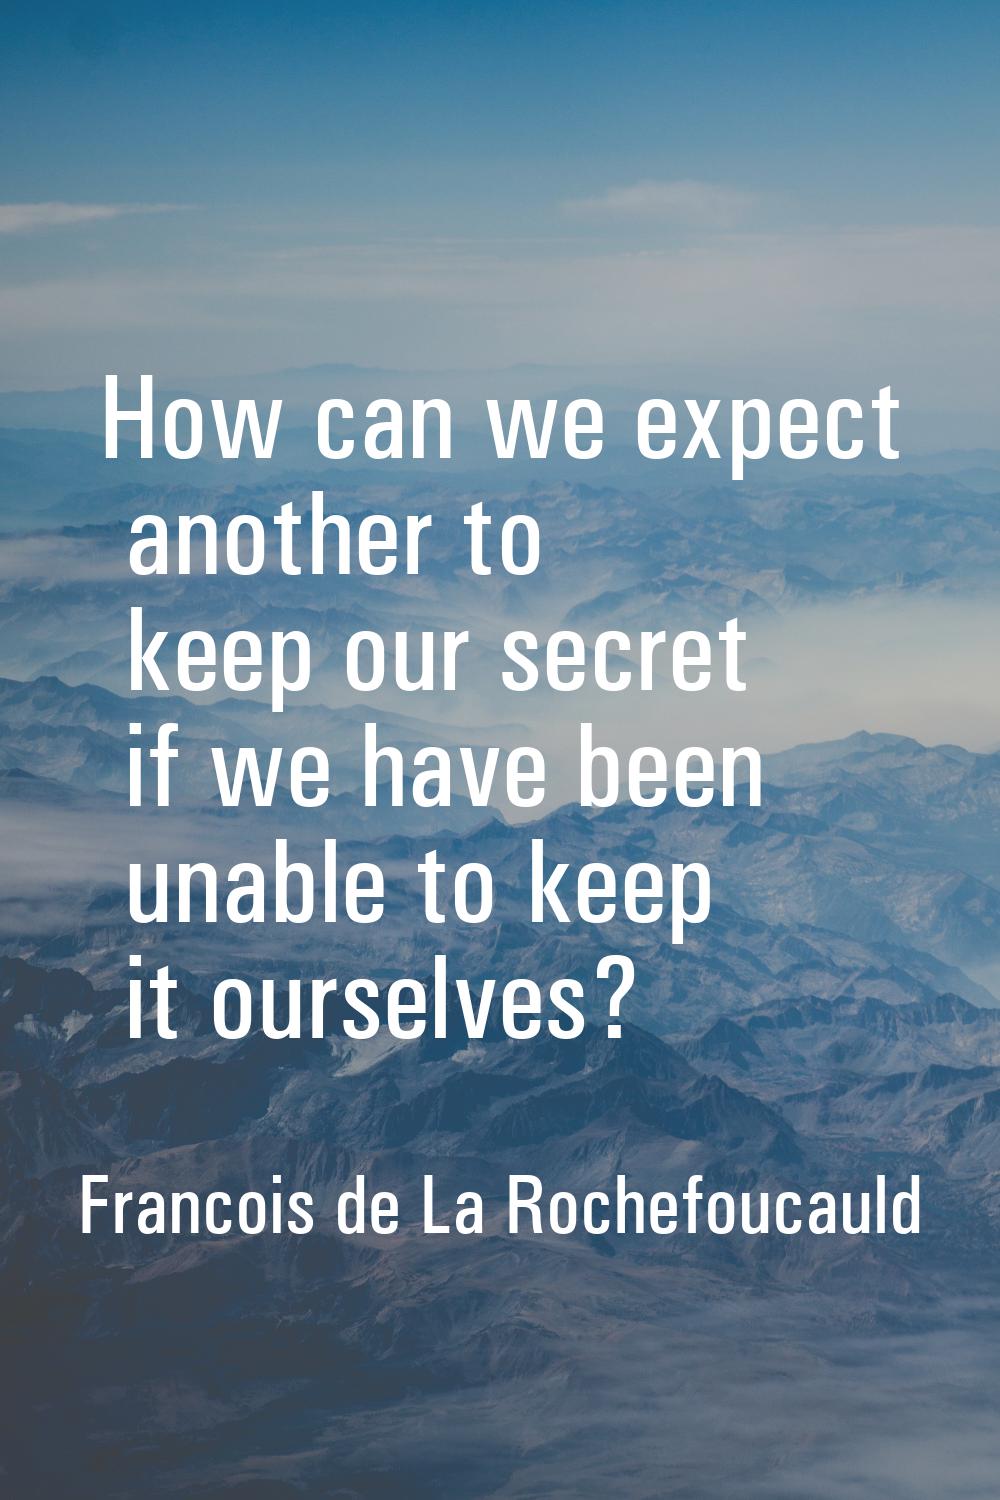 How can we expect another to keep our secret if we have been unable to keep it ourselves?